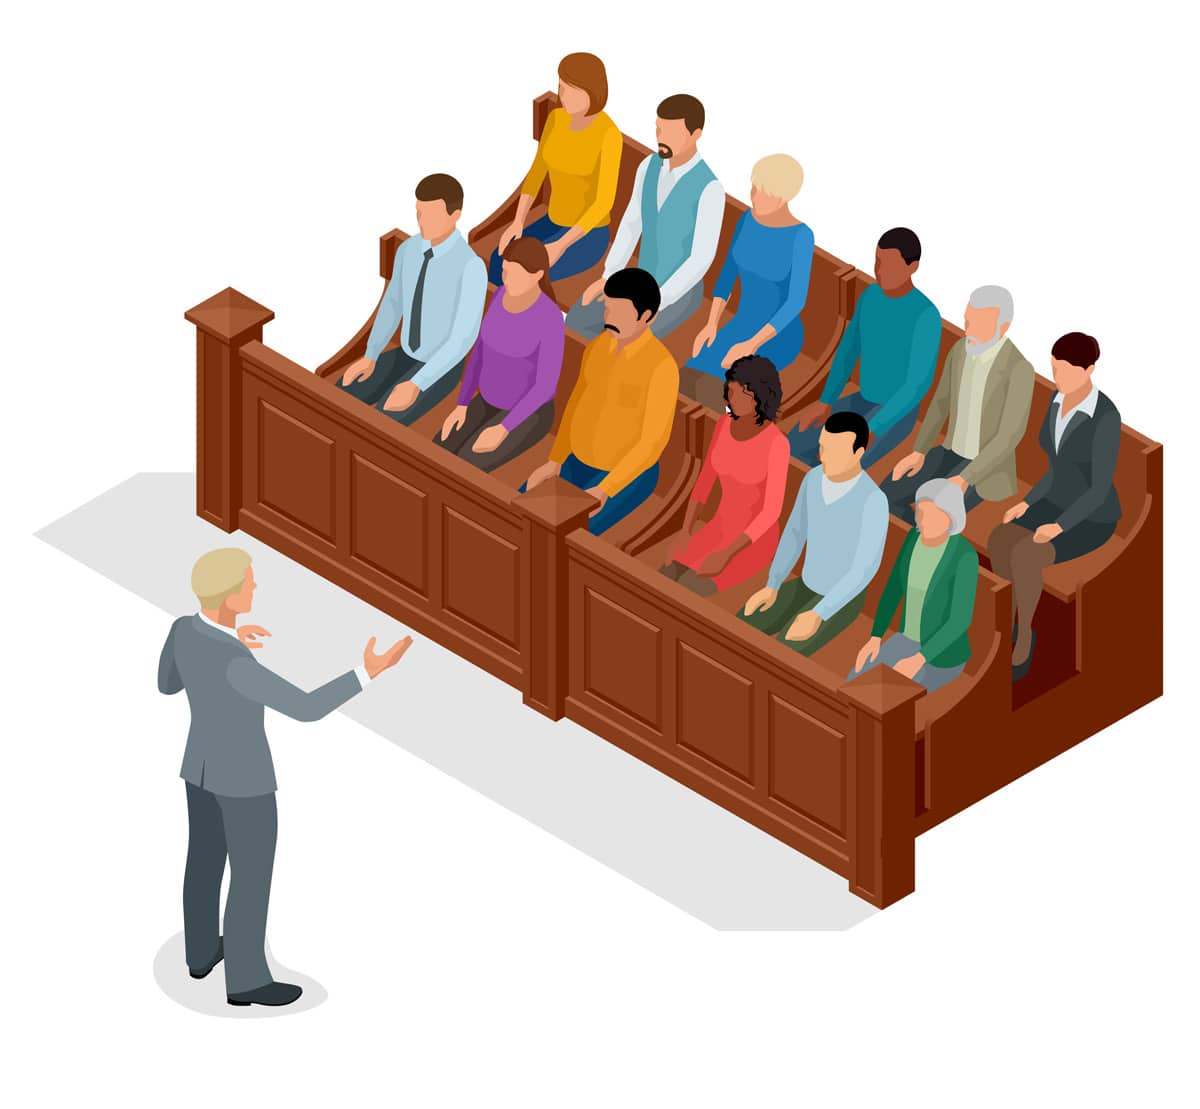 An illustration of a jury consultant speaking with a seated group of jurors in El Paso.